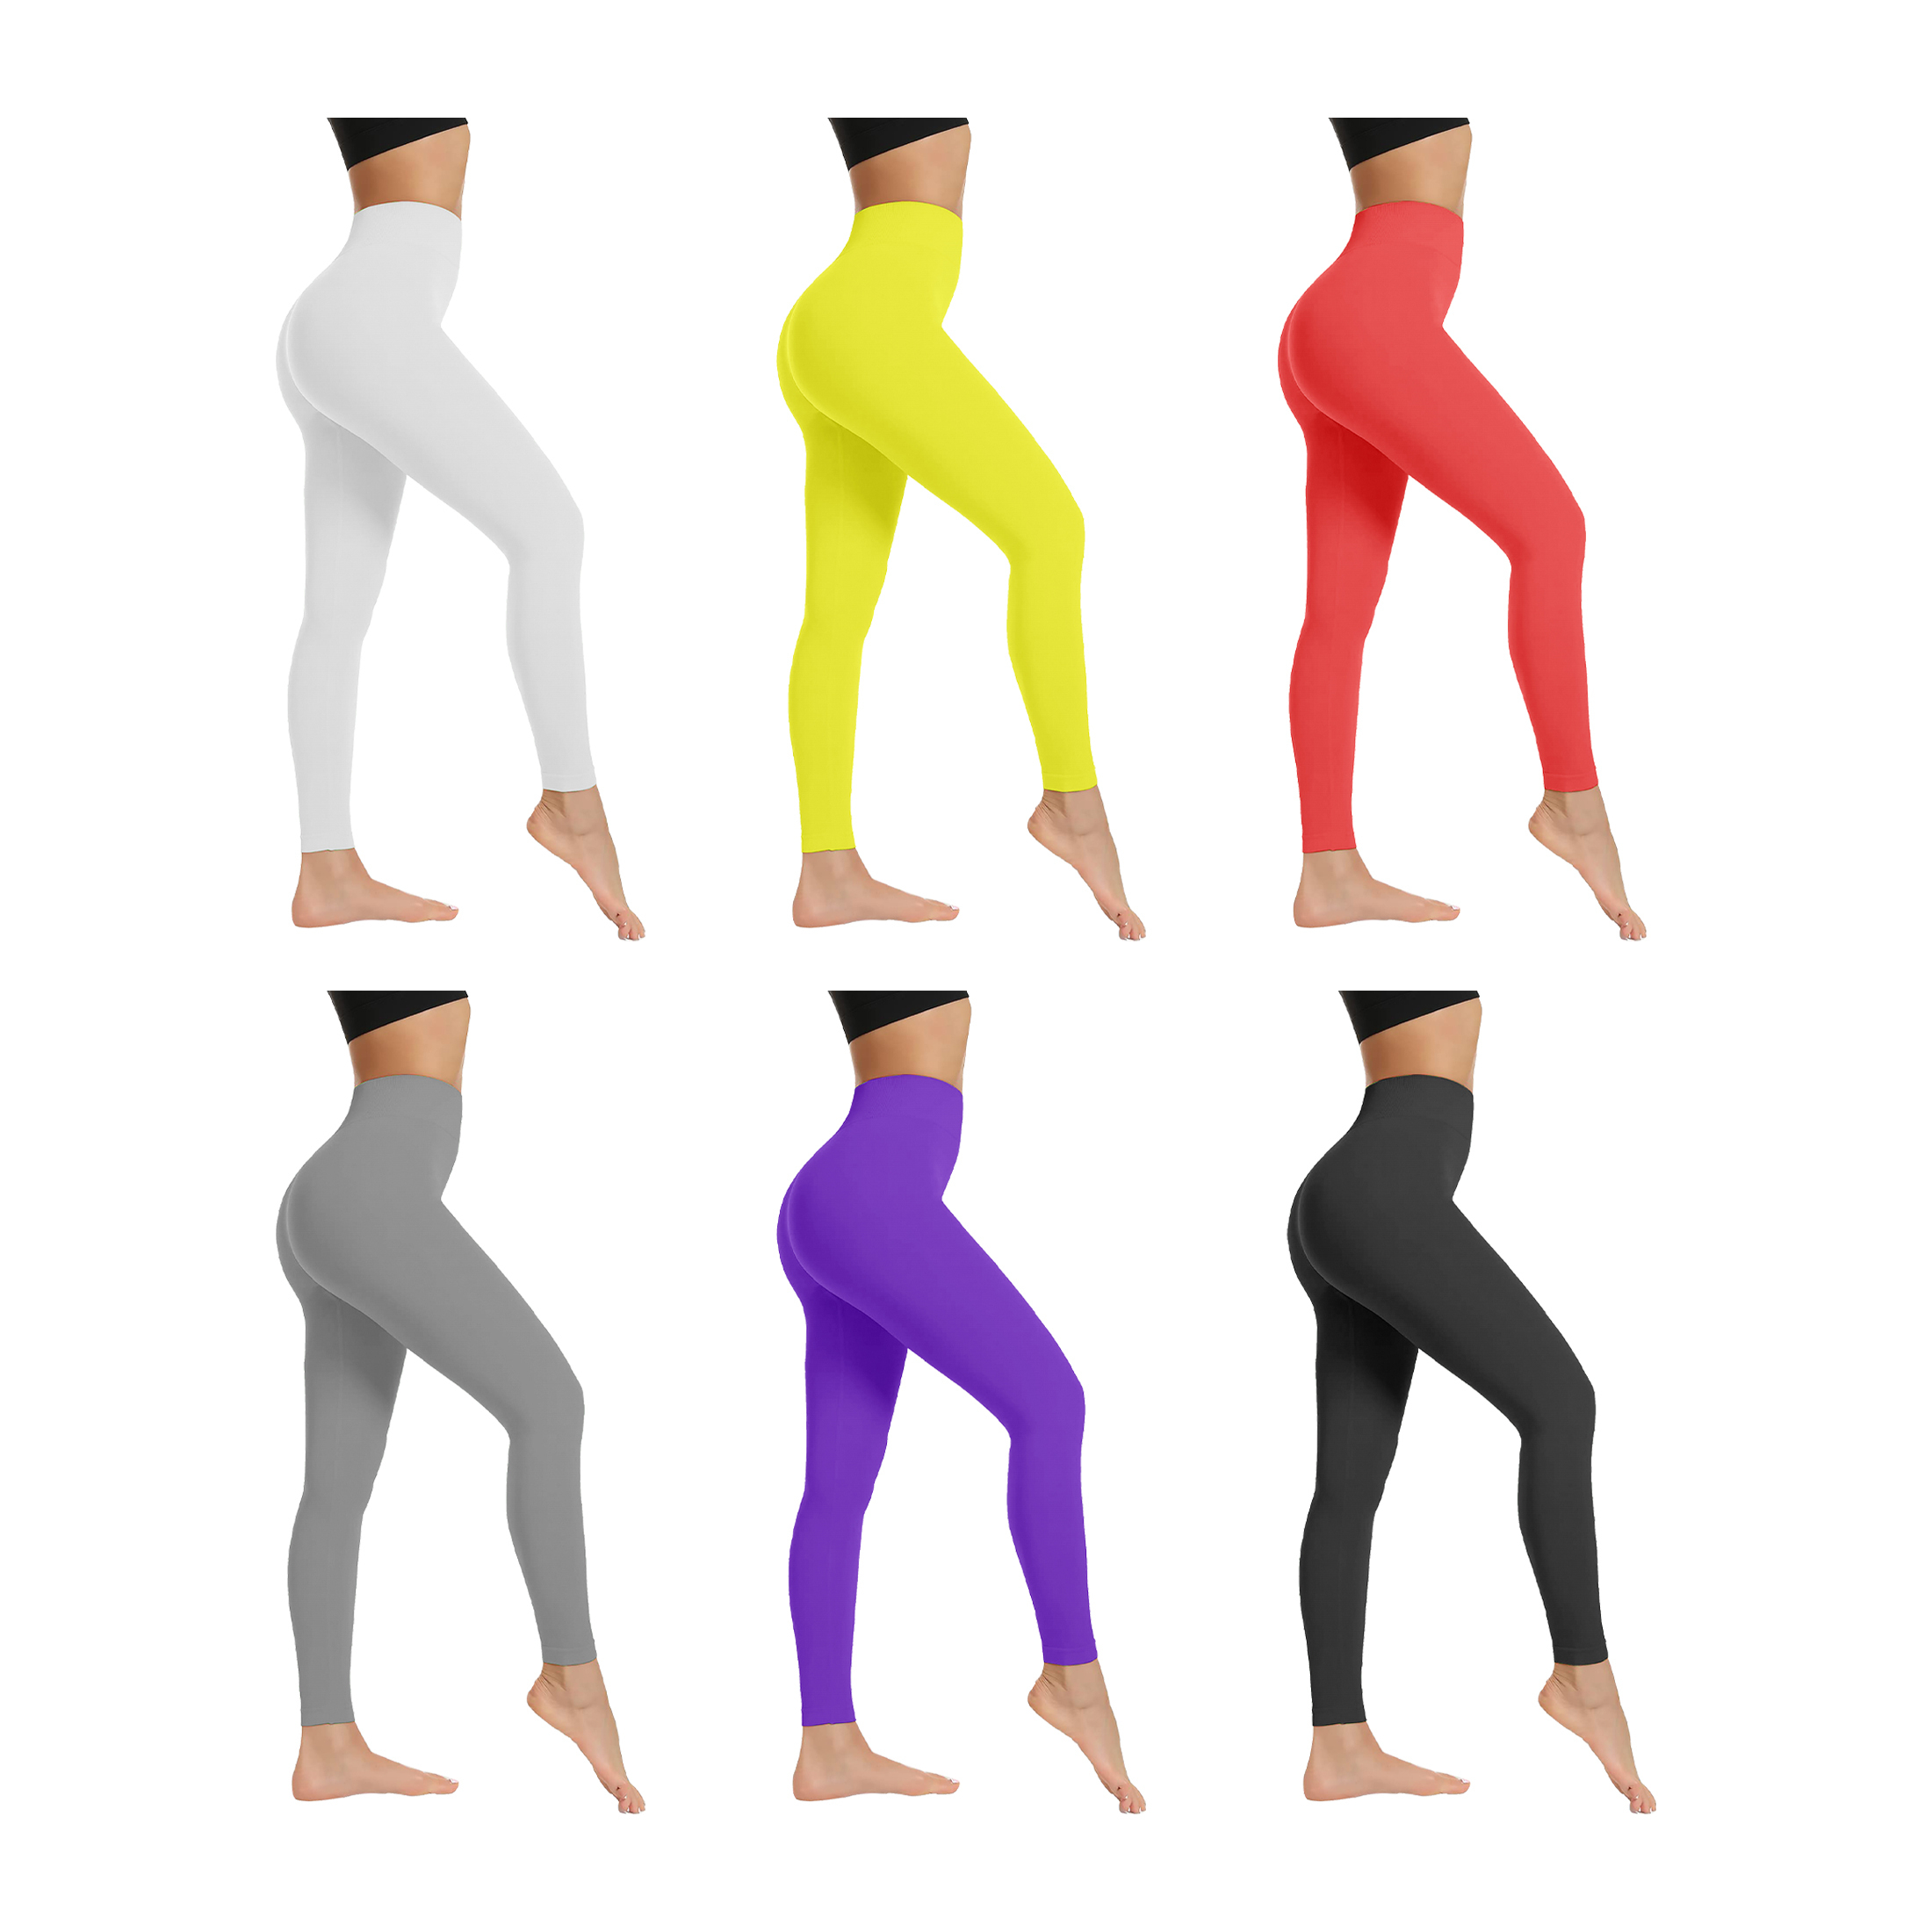 2-Pack: Women's High-Waist Ultra-Soft Stretchy Solid Fitness Yoga Leggings Pants - M